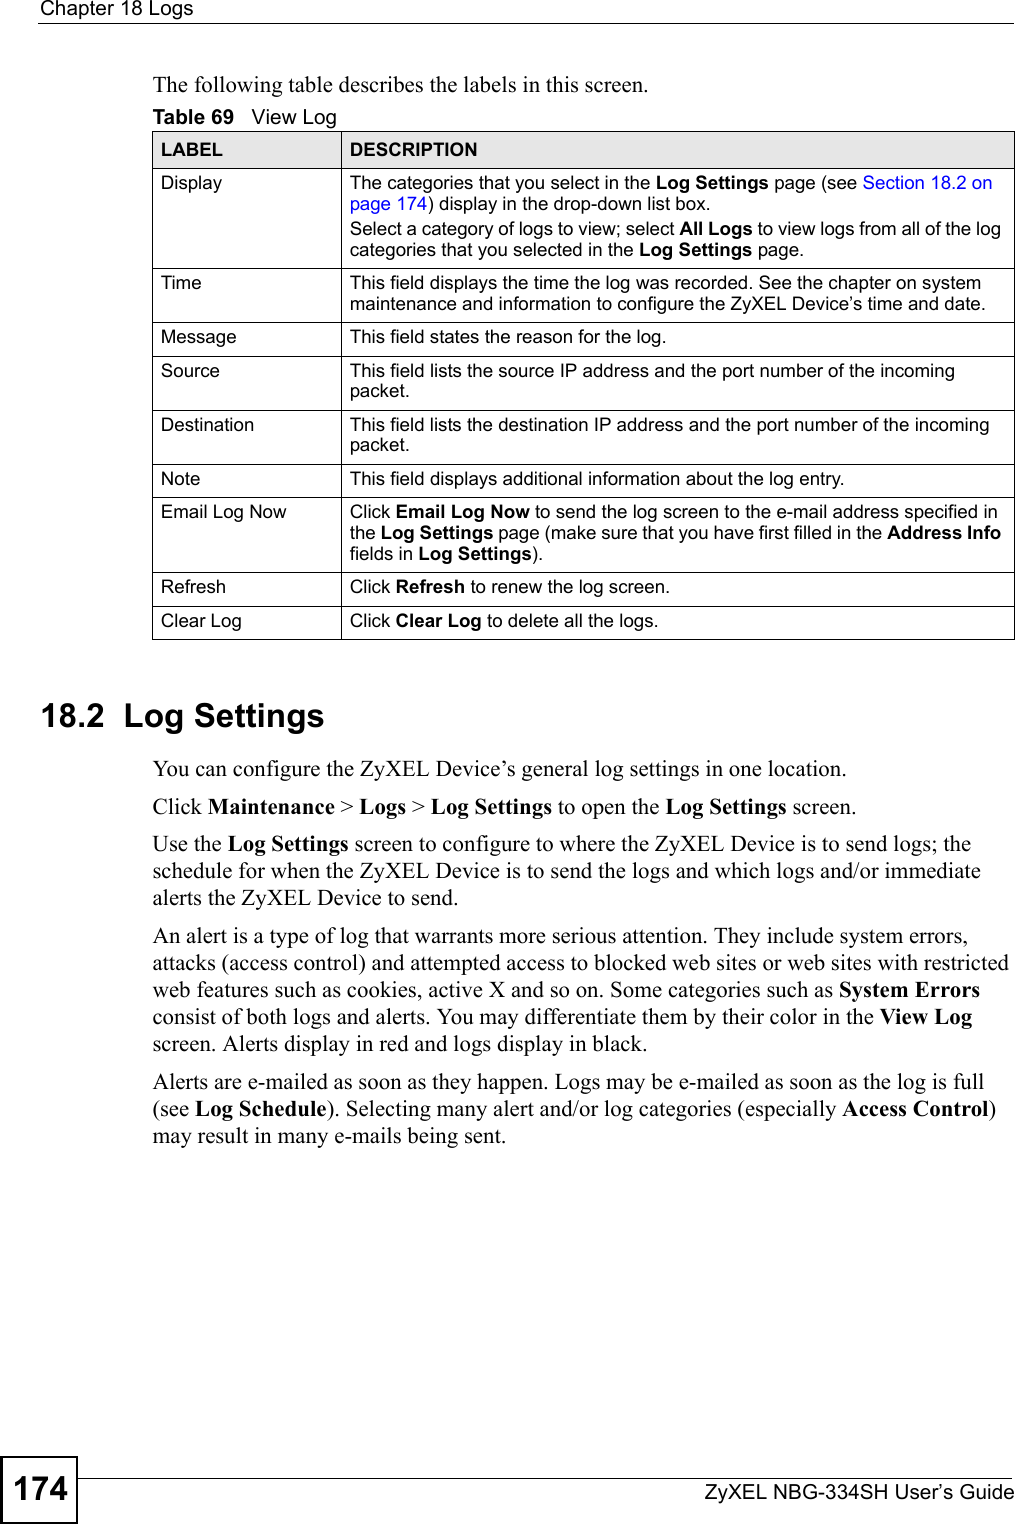 Chapter 18 LogsZyXEL NBG-334SH User’s Guide174The following table describes the labels in this screen.18.2  Log SettingsYou can configure the ZyXEL Device’s general log settings in one location.Click Maintenance &gt; Logs &gt; Log Settings to open the Log Settings screen.Use the Log Settings screen to configure to where the ZyXEL Device is to send logs; the schedule for when the ZyXEL Device is to send the logs and which logs and/or immediate alerts the ZyXEL Device to send.An alert is a type of log that warrants more serious attention. They include system errors, attacks (access control) and attempted access to blocked web sites or web sites with restricted web features such as cookies, active X and so on. Some categories such as System Errors consist of both logs and alerts. You may differentiate them by their color in the View Log screen. Alerts display in red and logs display in black.Alerts are e-mailed as soon as they happen. Logs may be e-mailed as soon as the log is full (see Log Schedule). Selecting many alert and/or log categories (especially Access Control) may result in many e-mails being sent.Table 69   View LogLABEL DESCRIPTIONDisplay  The categories that you select in the Log Settings page (see Section 18.2 on page 174) display in the drop-down list box.Select a category of logs to view; select All Logs to view logs from all of the log categories that you selected in the Log Settings page. Time  This field displays the time the log was recorded. See the chapter on system maintenance and information to configure the ZyXEL Device’s time and date.Message This field states the reason for the log.Source This field lists the source IP address and the port number of the incoming packet.Destination  This field lists the destination IP address and the port number of the incoming packet.Note This field displays additional information about the log entry. Email Log Now  Click Email Log Now to send the log screen to the e-mail address specified in the Log Settings page (make sure that you have first filled in the Address Info fields in Log Settings).Refresh Click Refresh to renew the log screen. Clear Log  Click Clear Log to delete all the logs. 